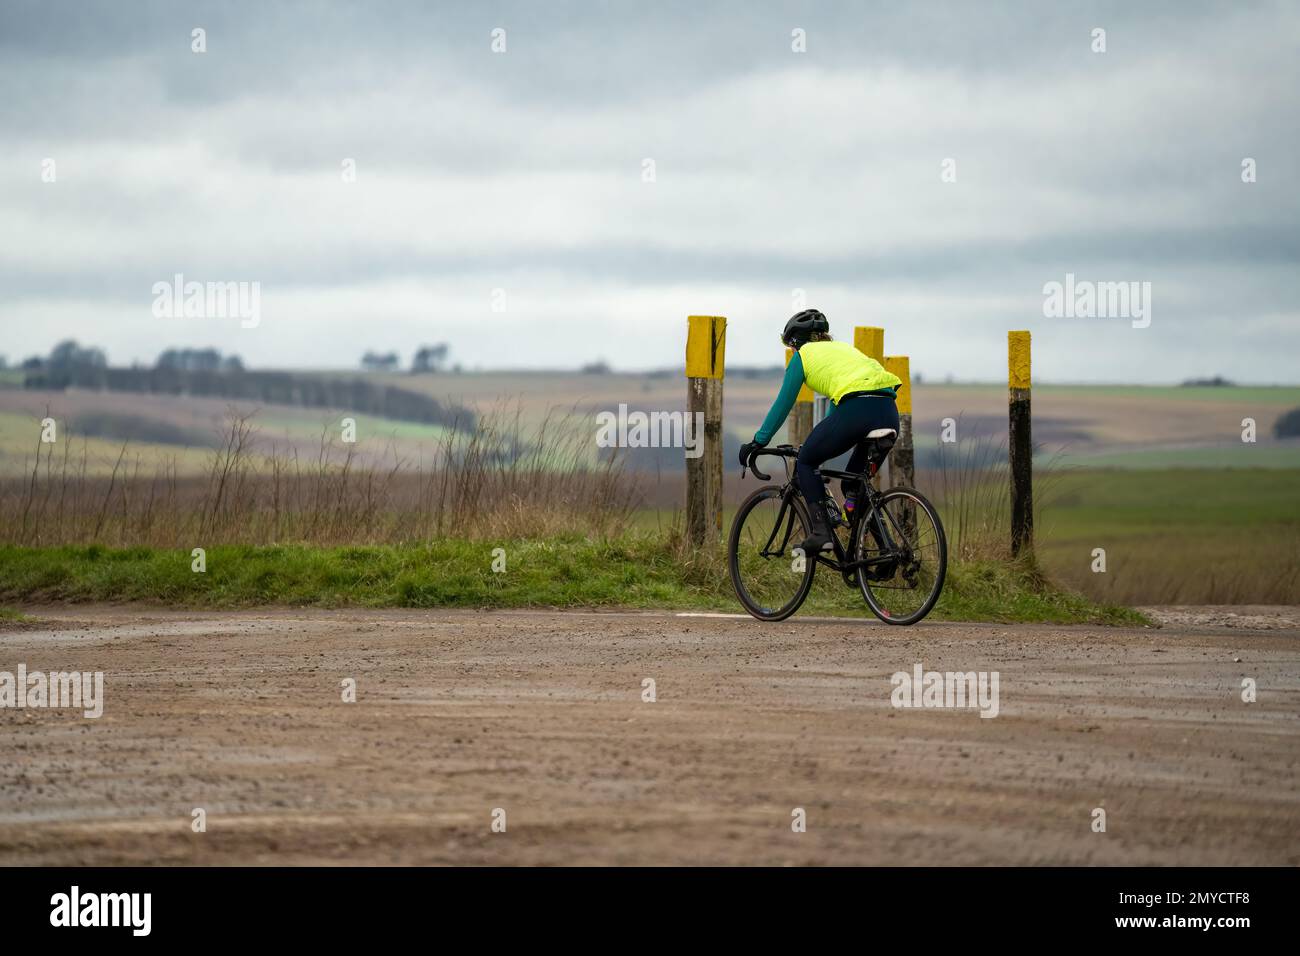 a sports cyclist wearing a yellow hig-vis top, riding a racing bike past tank crossing marker posts Stock Photo